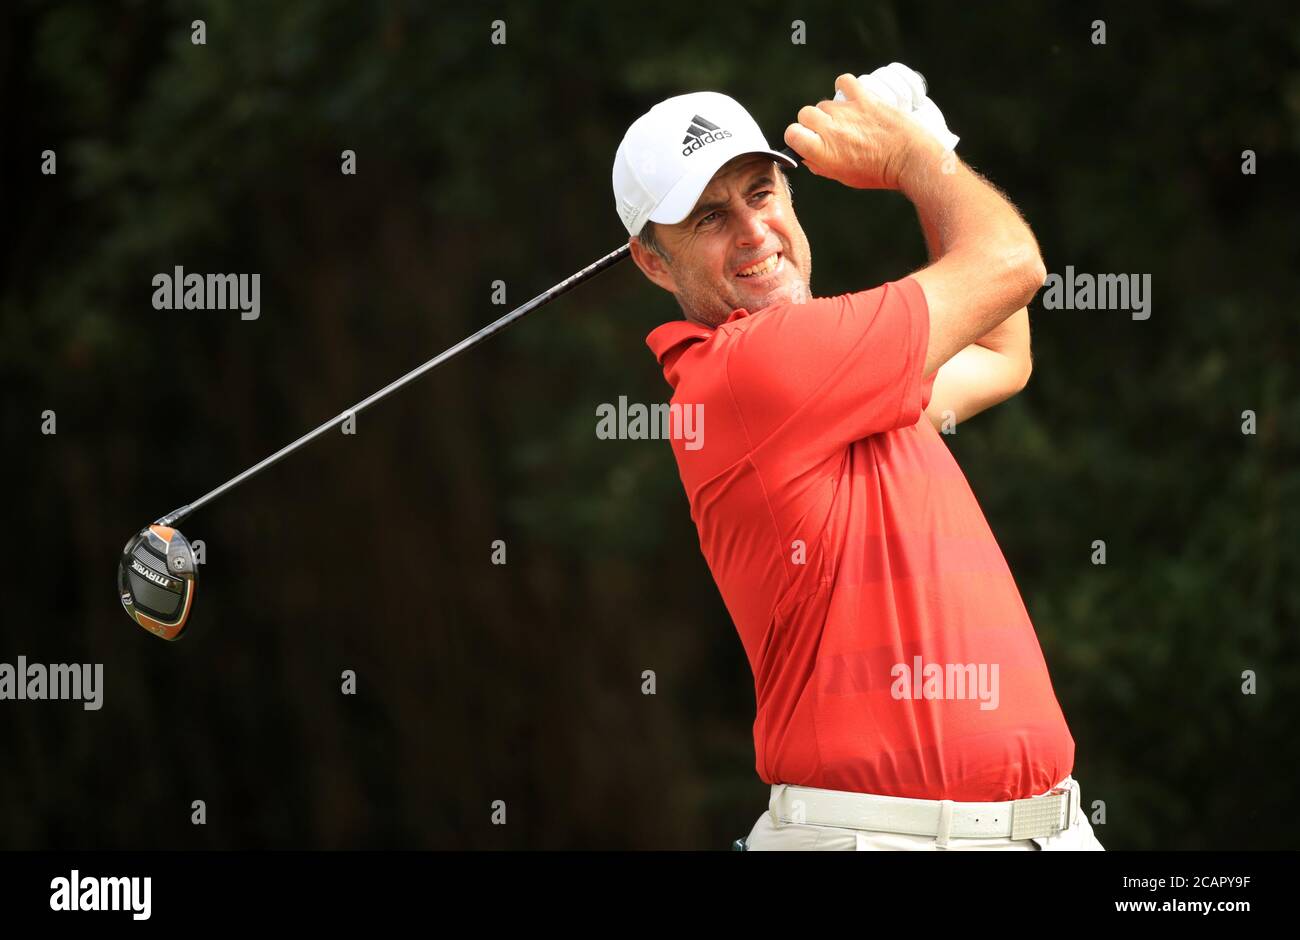 England's Richard Bland during day three of the English Championship at Hanbury Manor Marriott Hotel and Country Club, Hertfordshire. Saturday August 8, 2020. See PA story GOLF Ware. Photo credit should read: Adam Davy/PA Wire. RESTRICTIONS: Editorial Use, No Commercial Use. Stock Photo